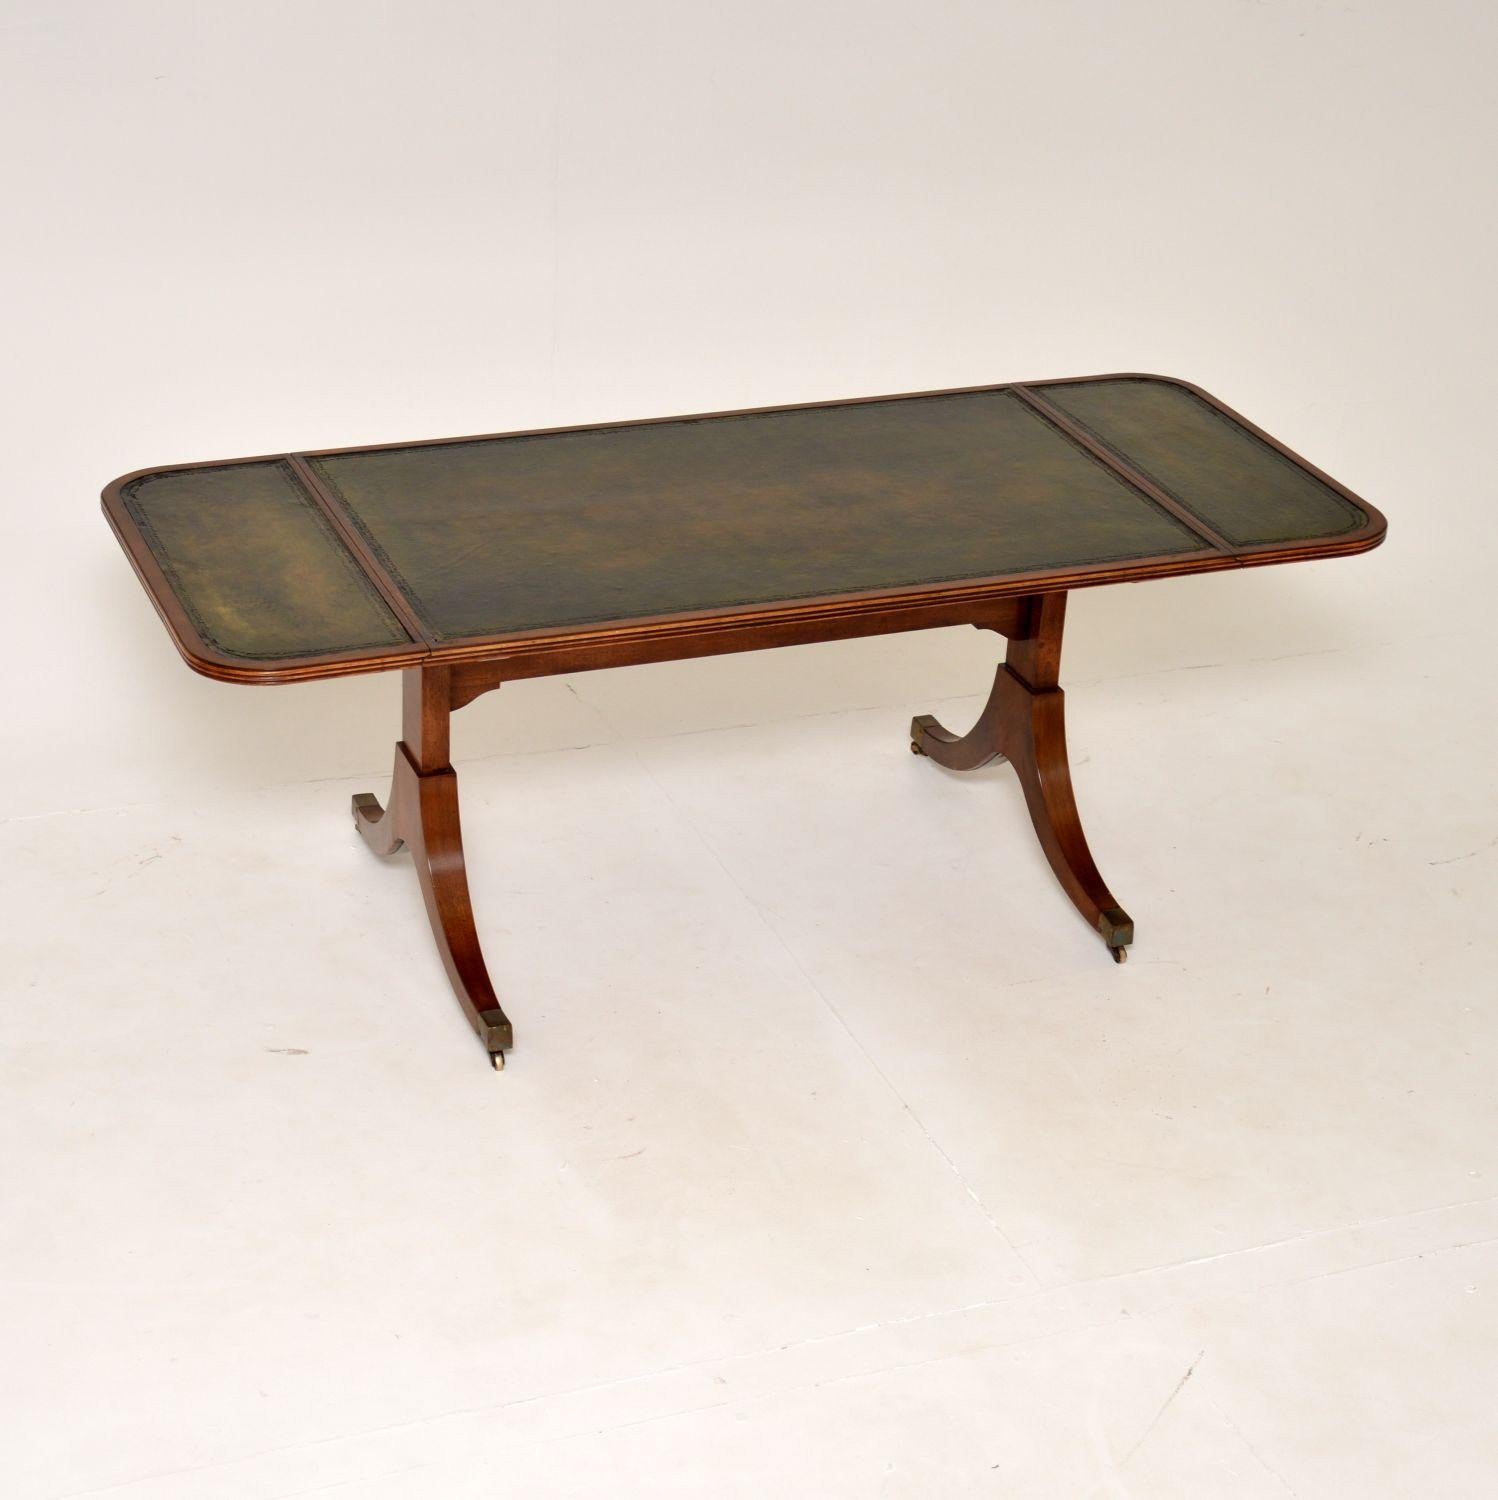 A lovely antique Regency style drop leaf coffee table in wood and leather. This was made in England, it dates from around the 1930’s.

It has a stylish and useful design, the drop down ends lift up and are supported with pull out rails to increase